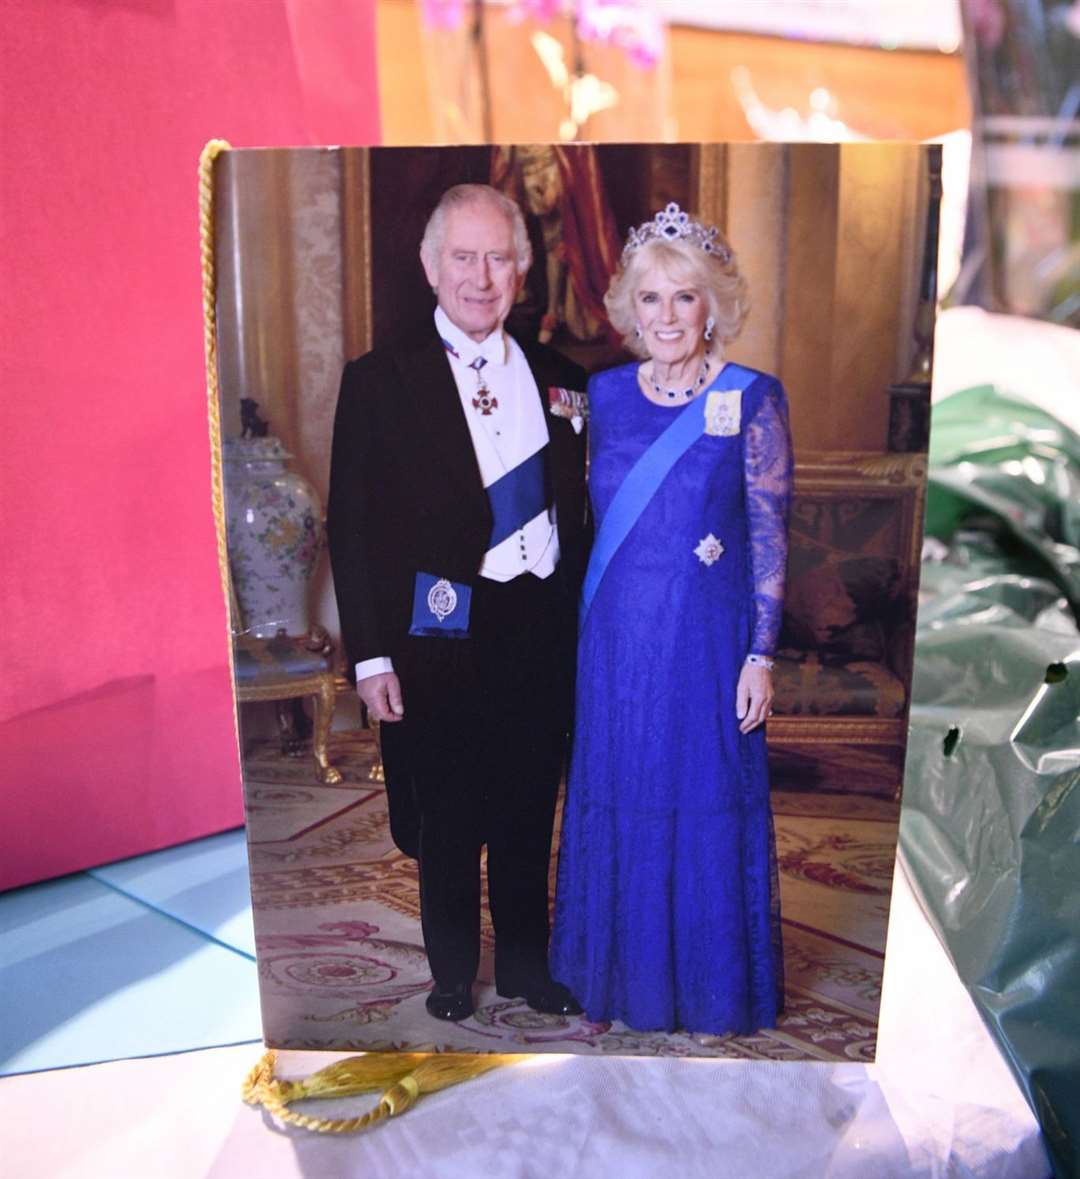 The card Marianne Stacey, from Deal, received from King Charles III marking her 100th birthday